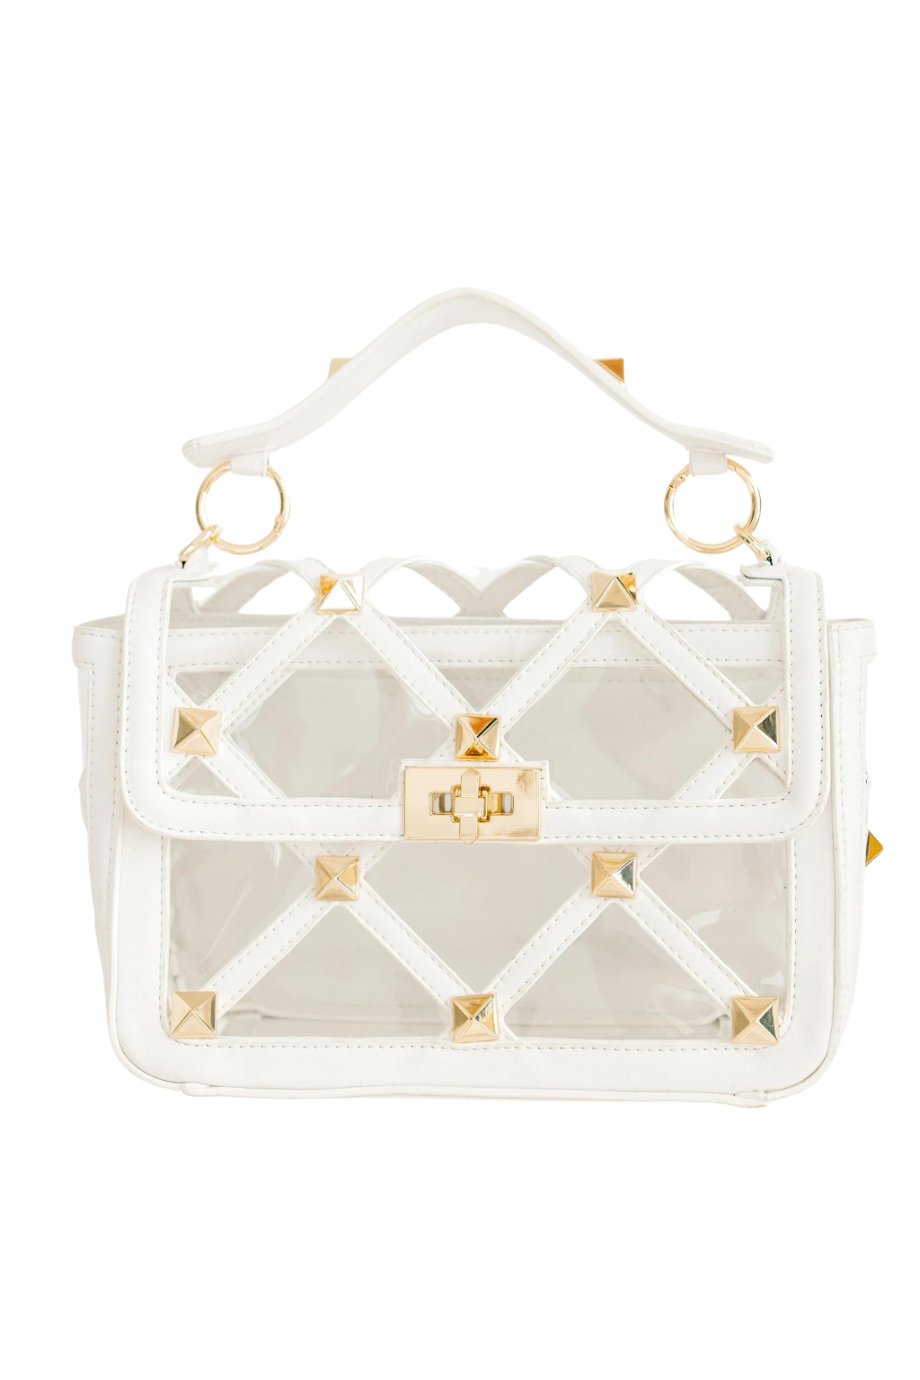 The Lily Gold Studded Clear Bag - Clearly Handbags - Color Game